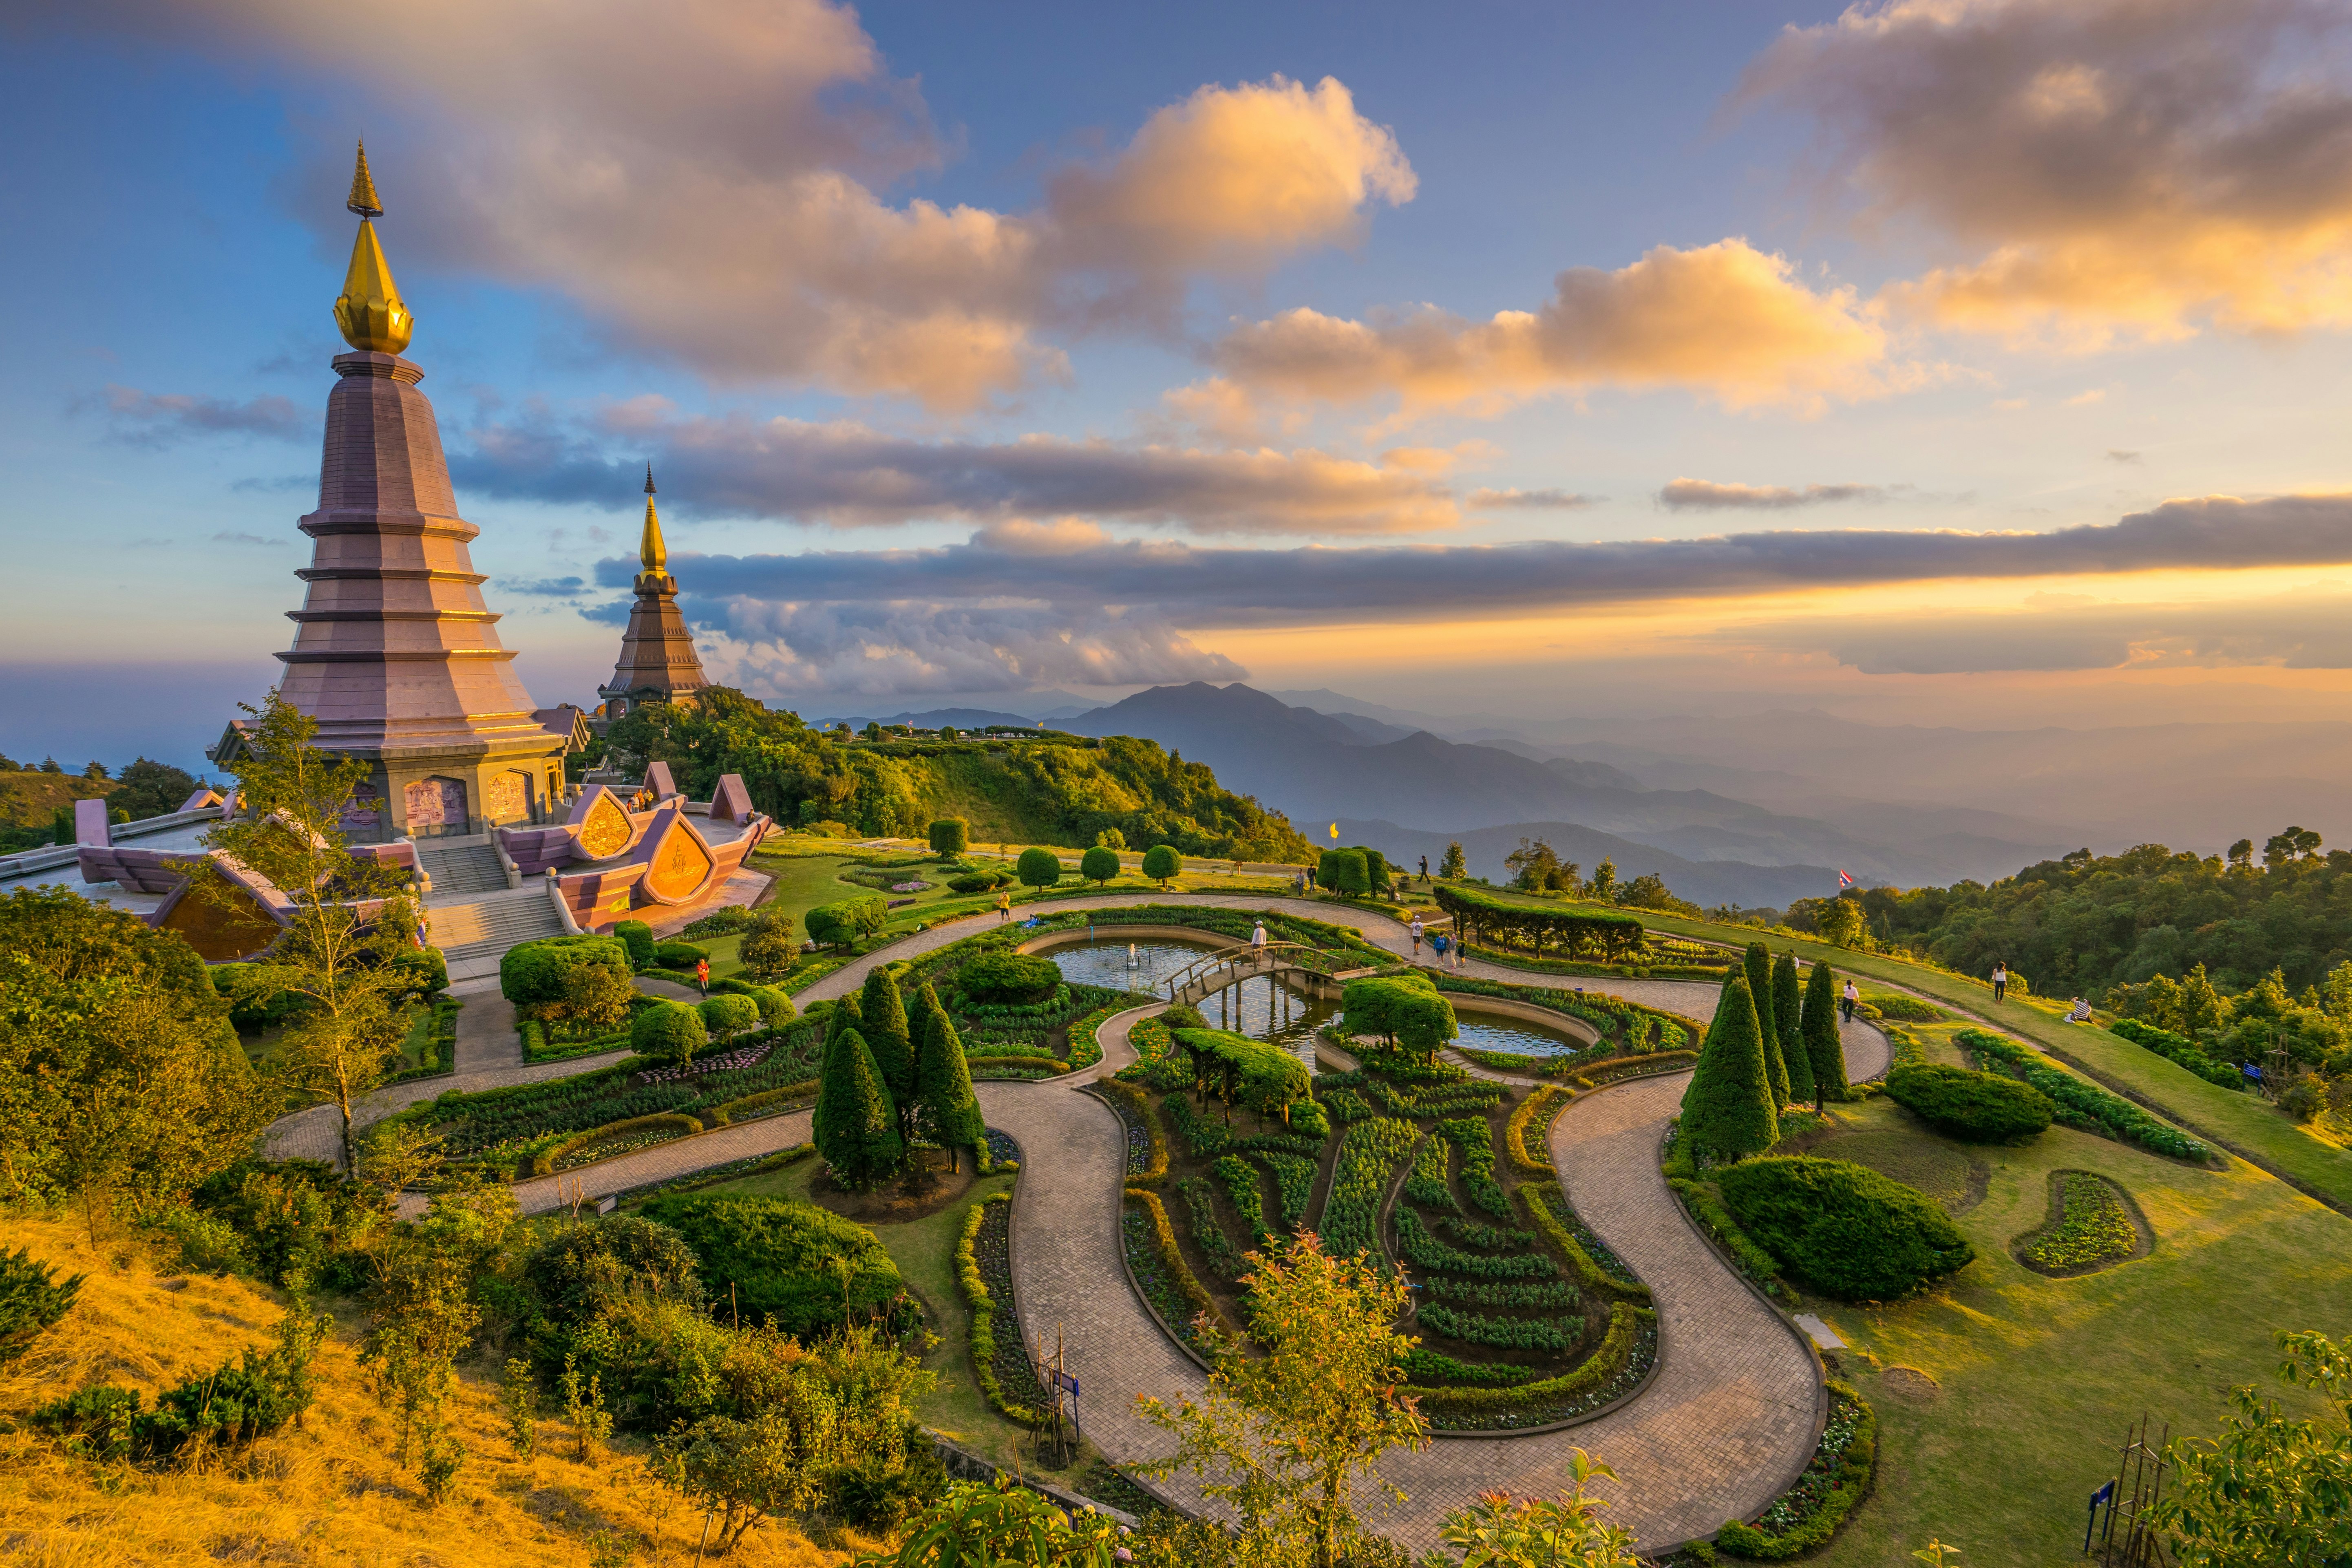 An aerival view of the summit of Doi Inthanon mountain near Chiang Mai, where two pagodas stand in manicured grounds.